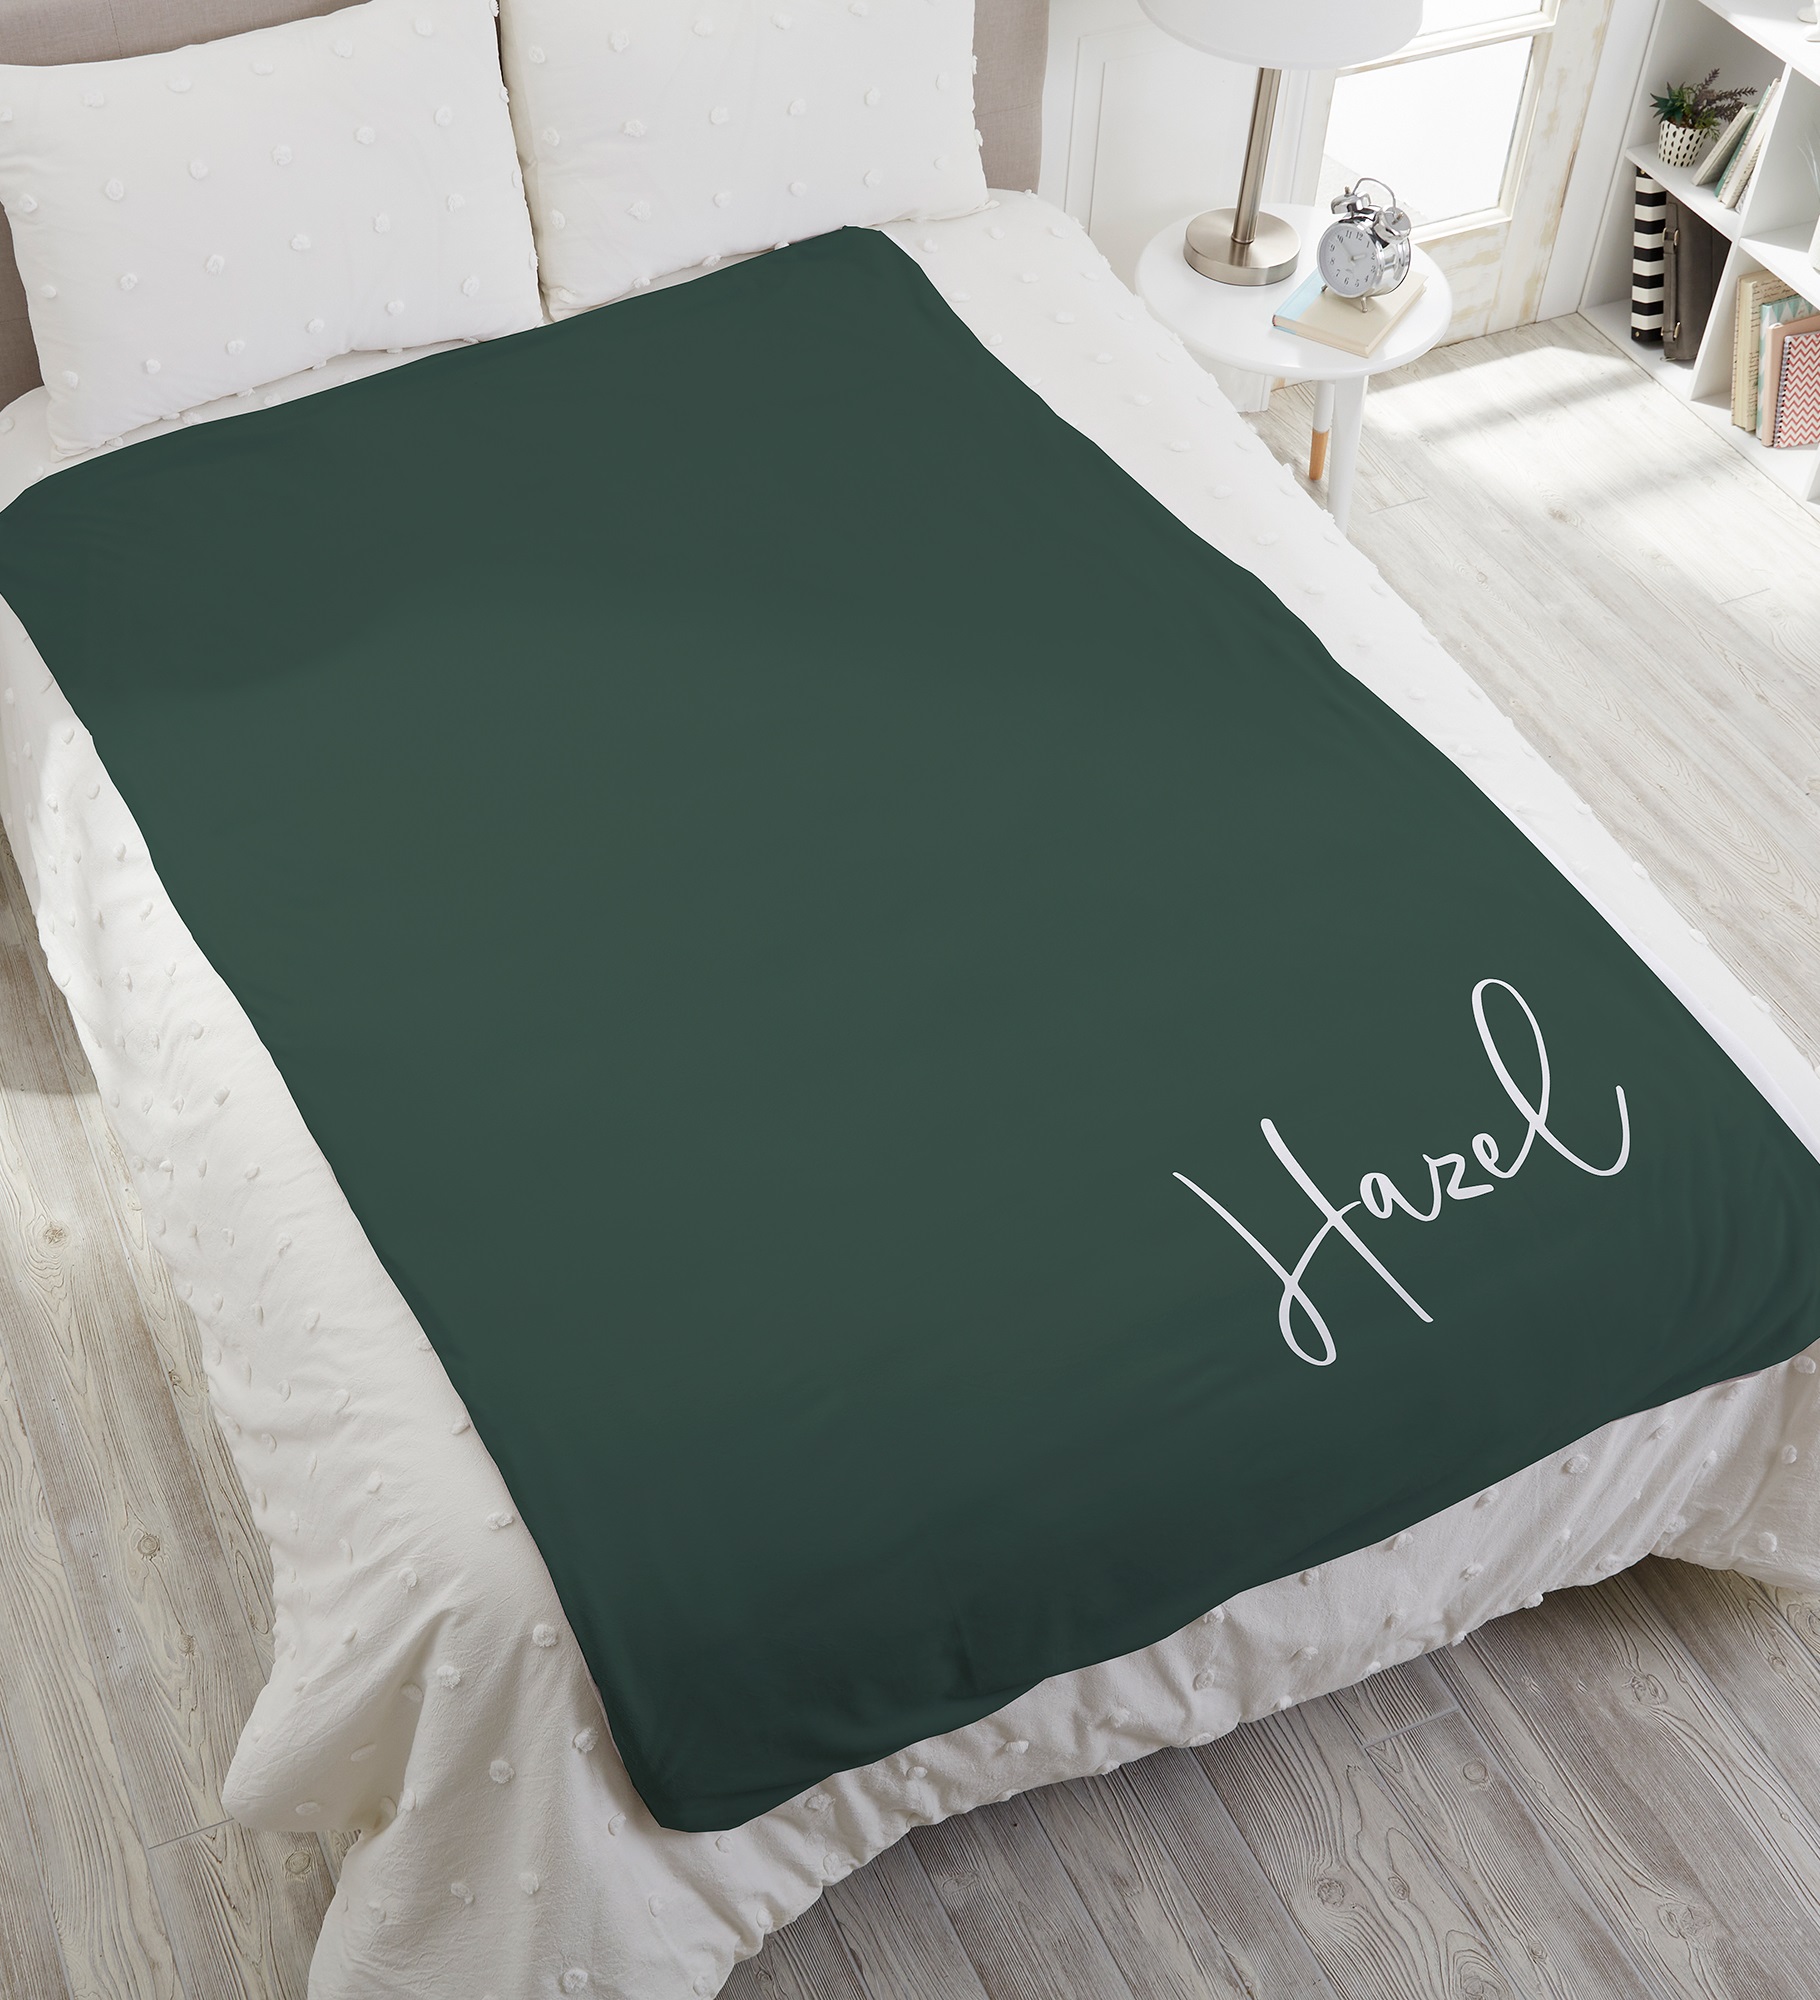 Trendy Script Personalized Weighted Blanket